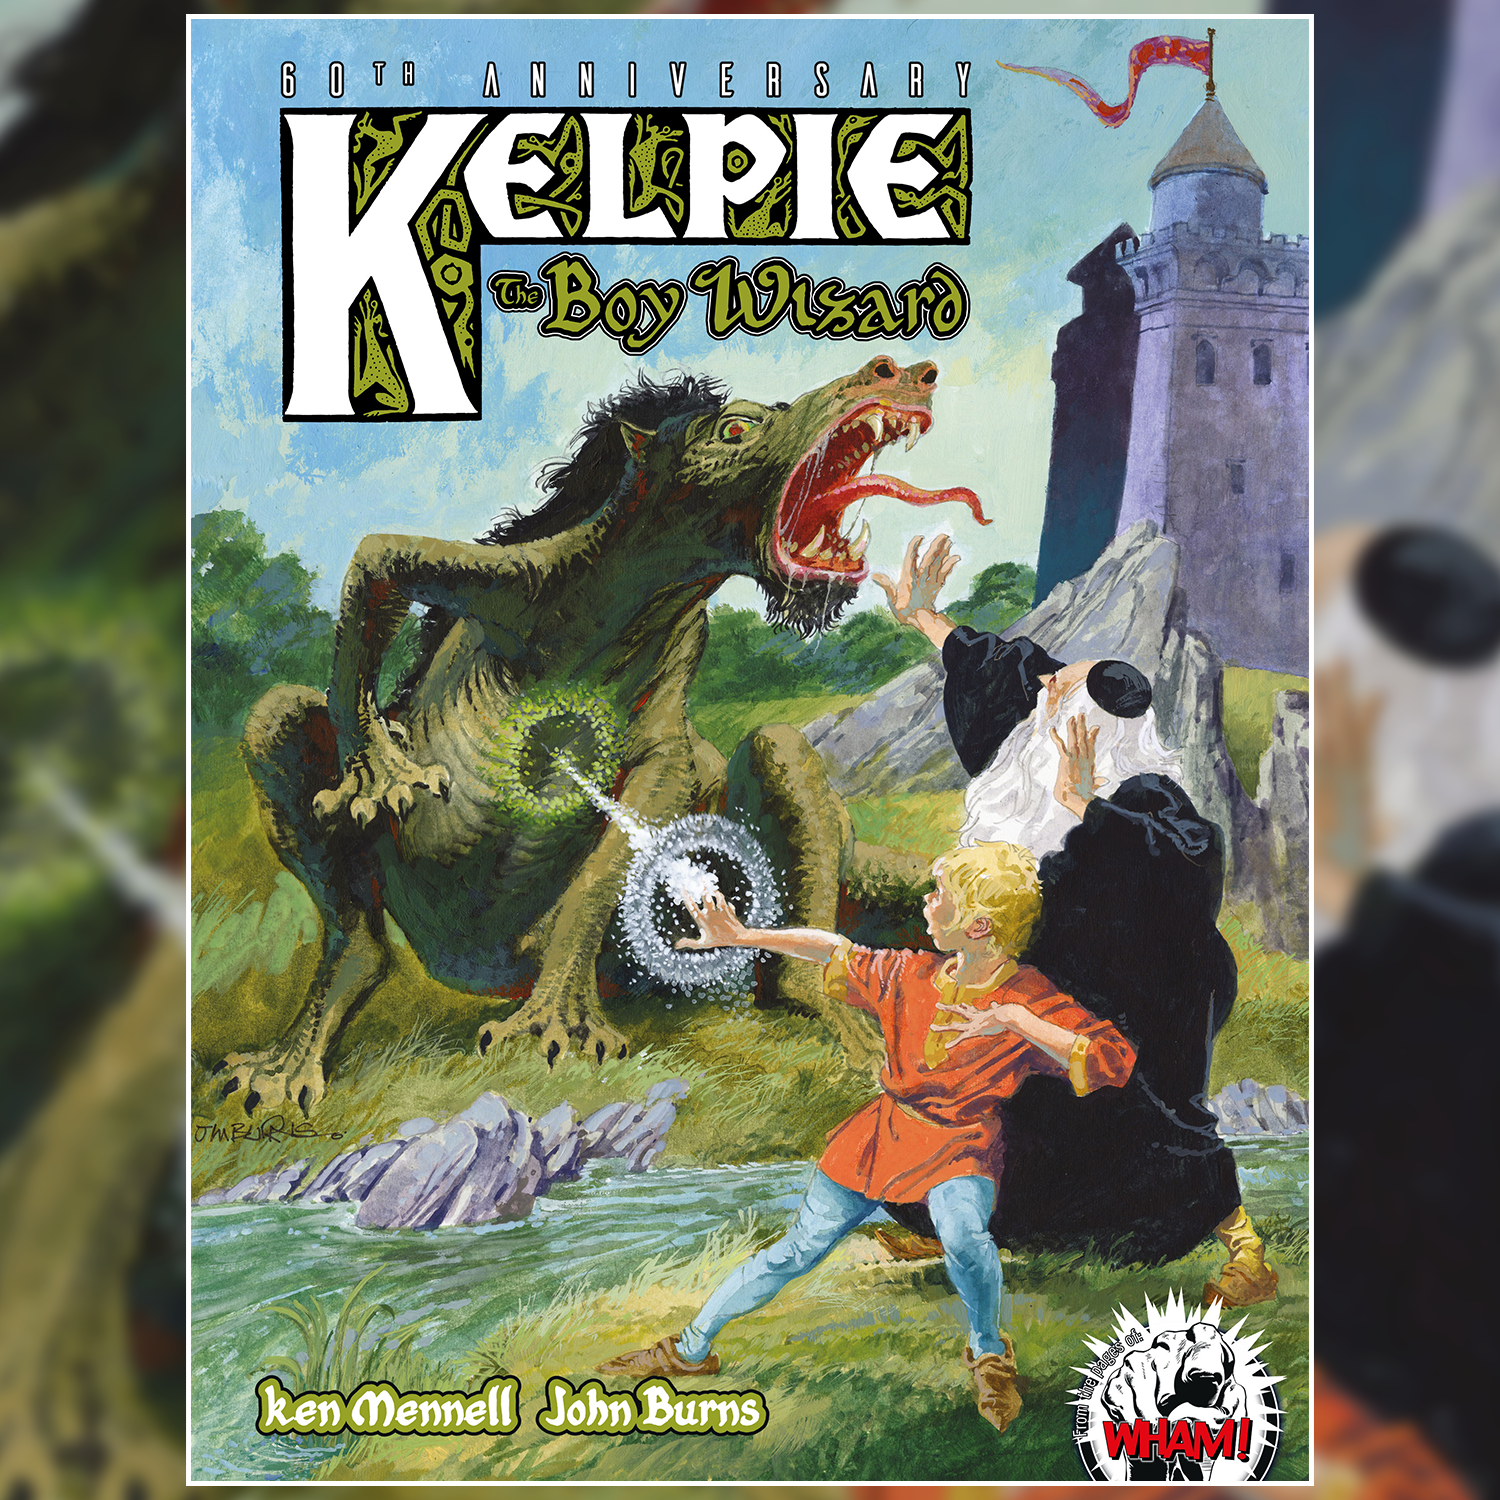 The Original Boy Wizard is back! Pre-Order the Kelpie The Boy Wizard: 60th Anniversary Edition